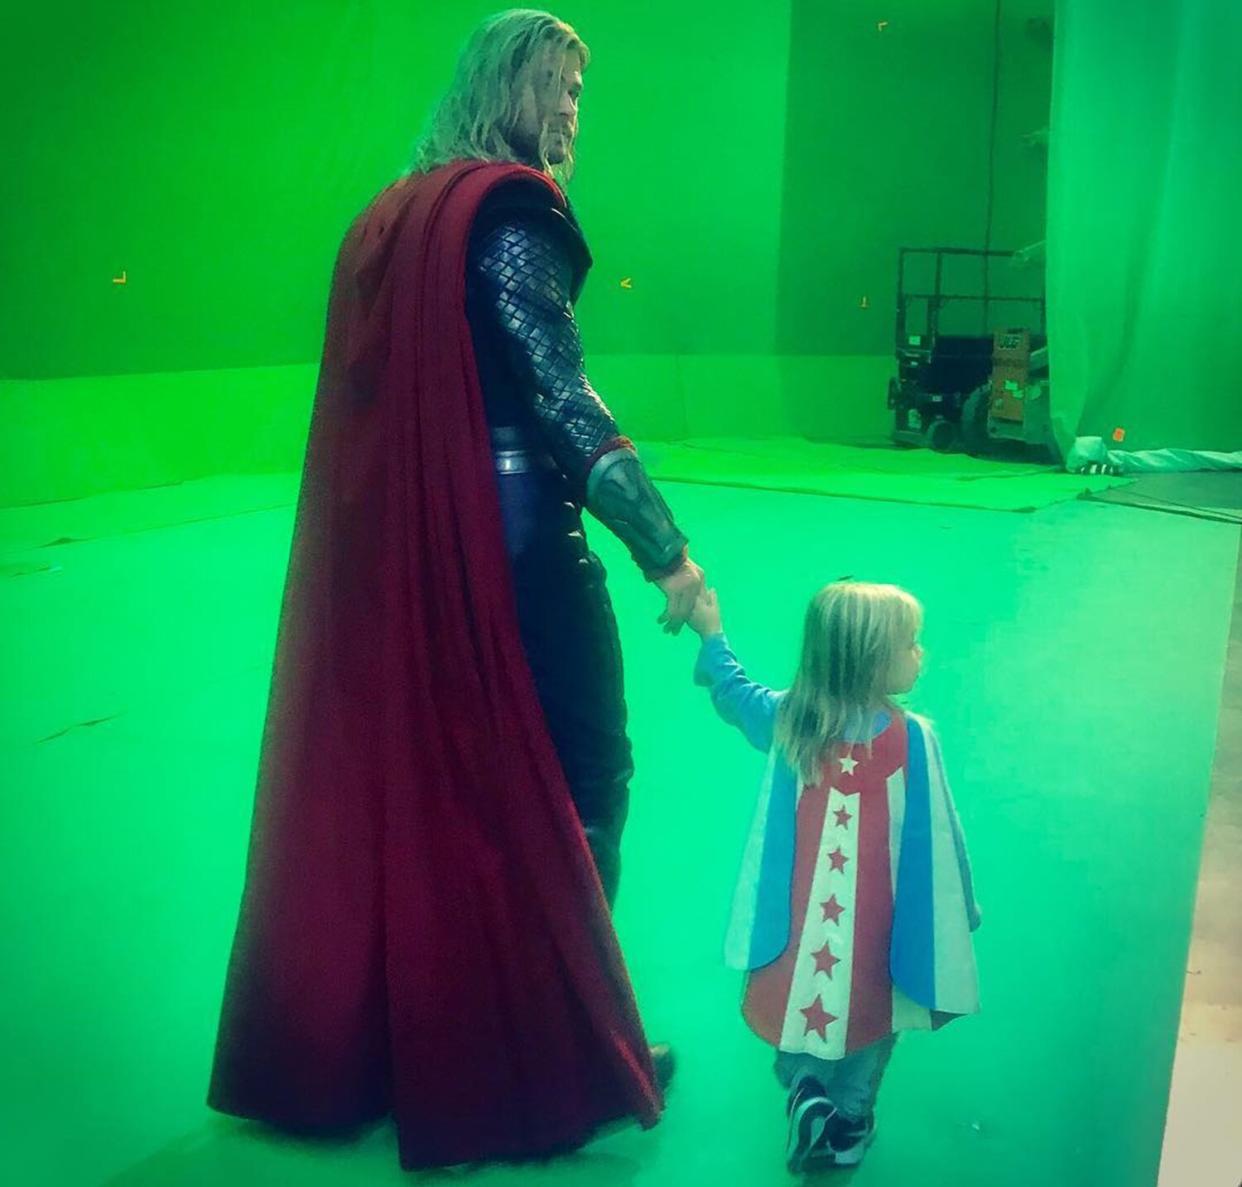 The passing of the torch #thorragnarok